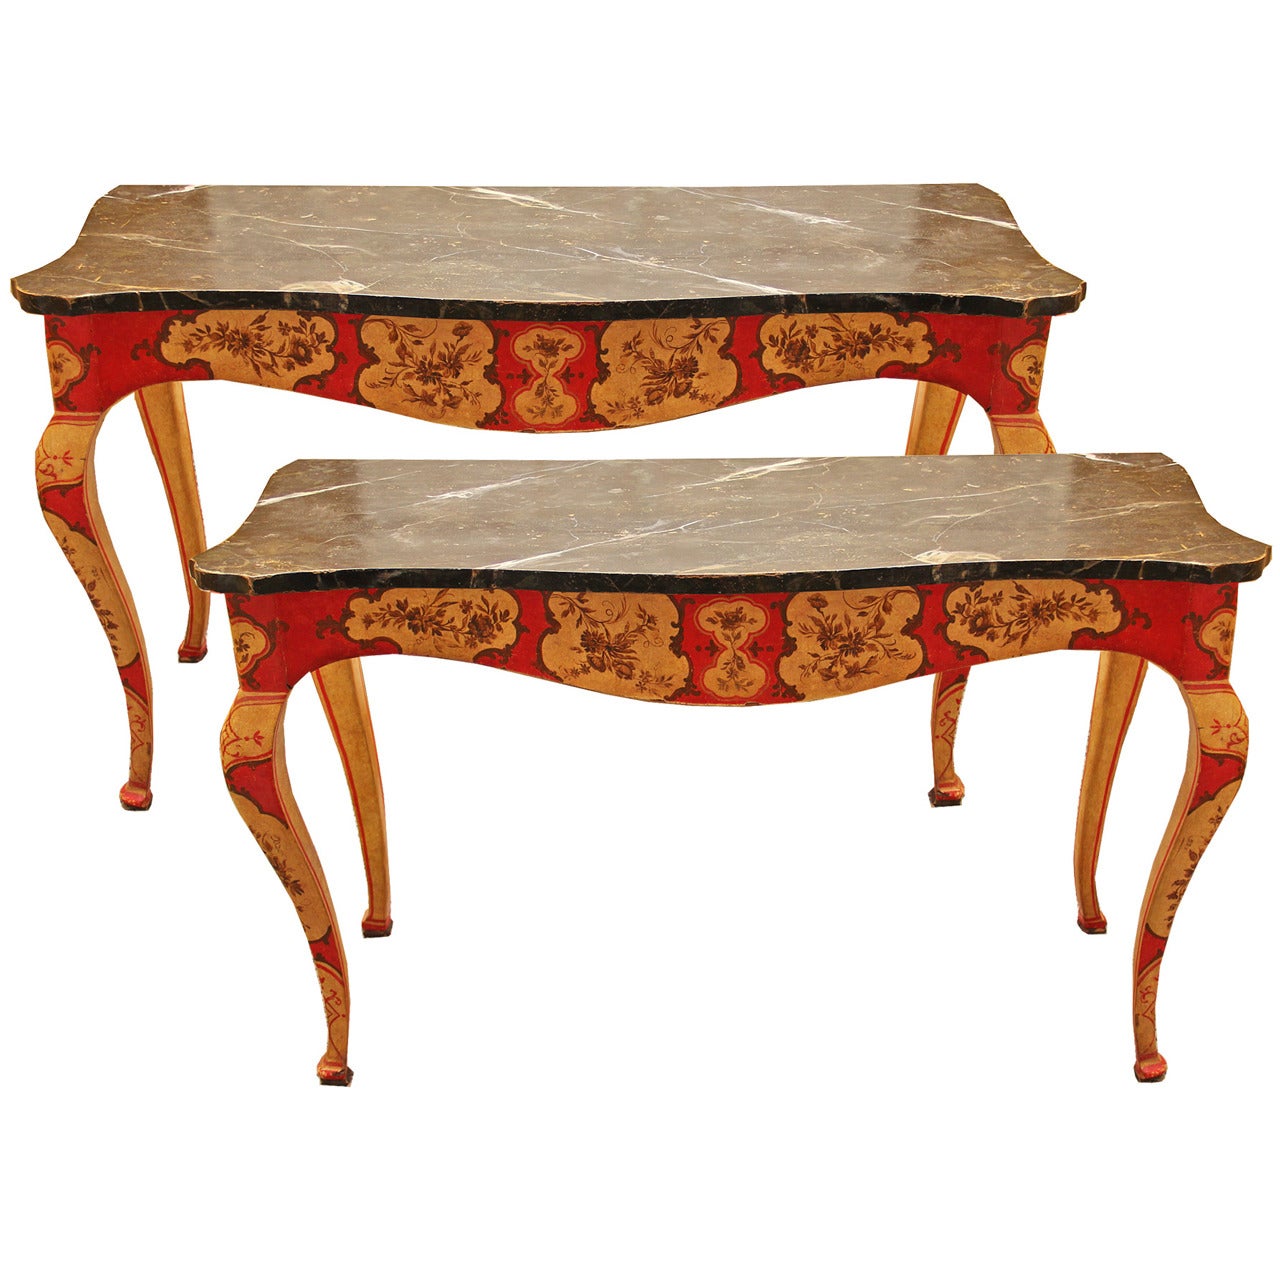 Striking Pair of 18th Century Venetian Polychrome Console Tables For Sale